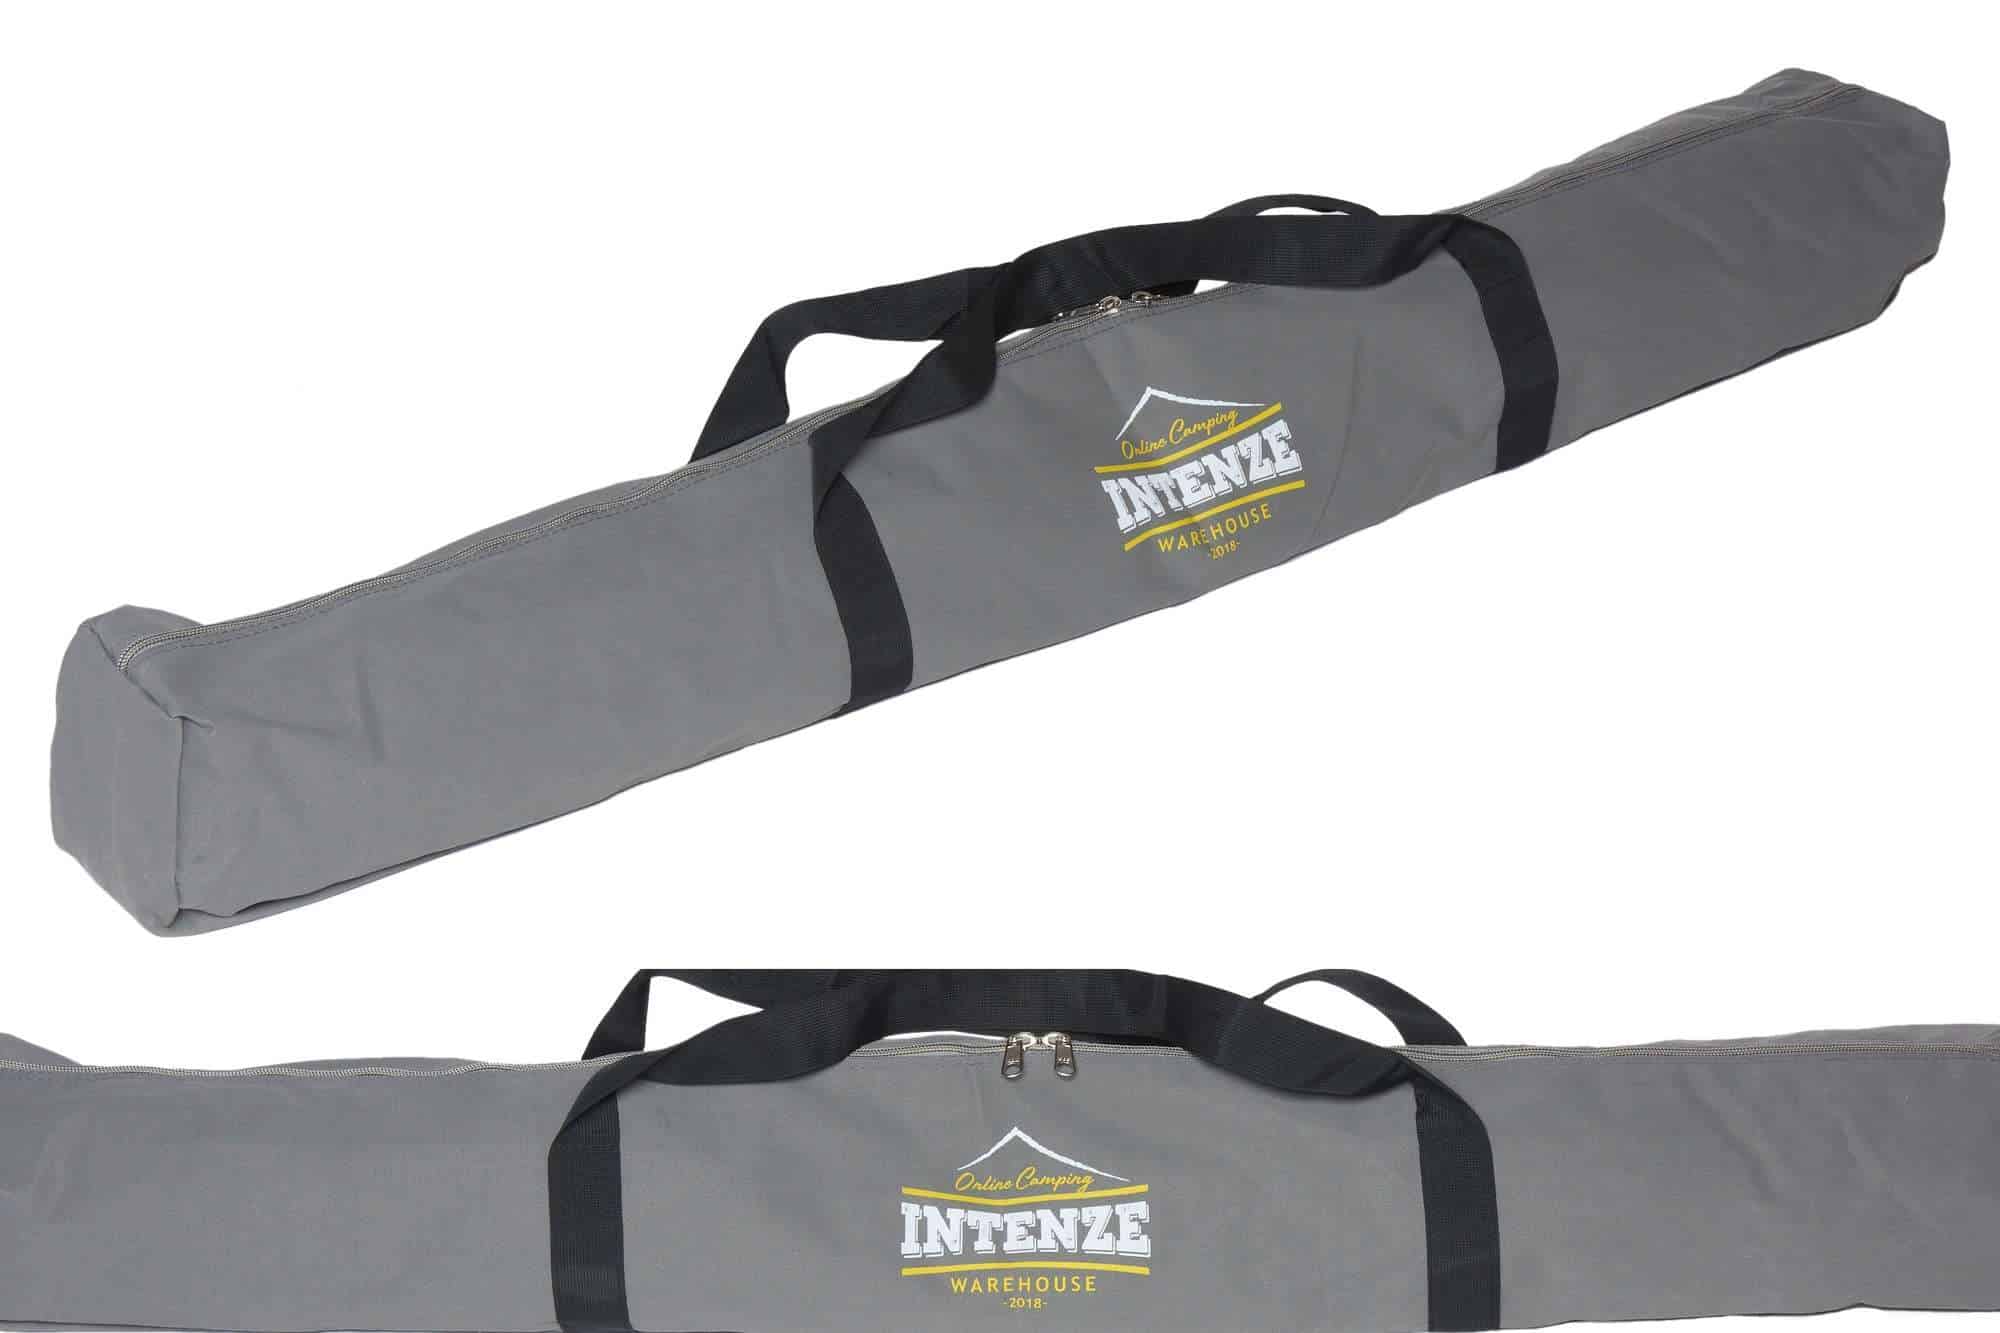 Discover more than 73 tent pole bags - in.duhocakina